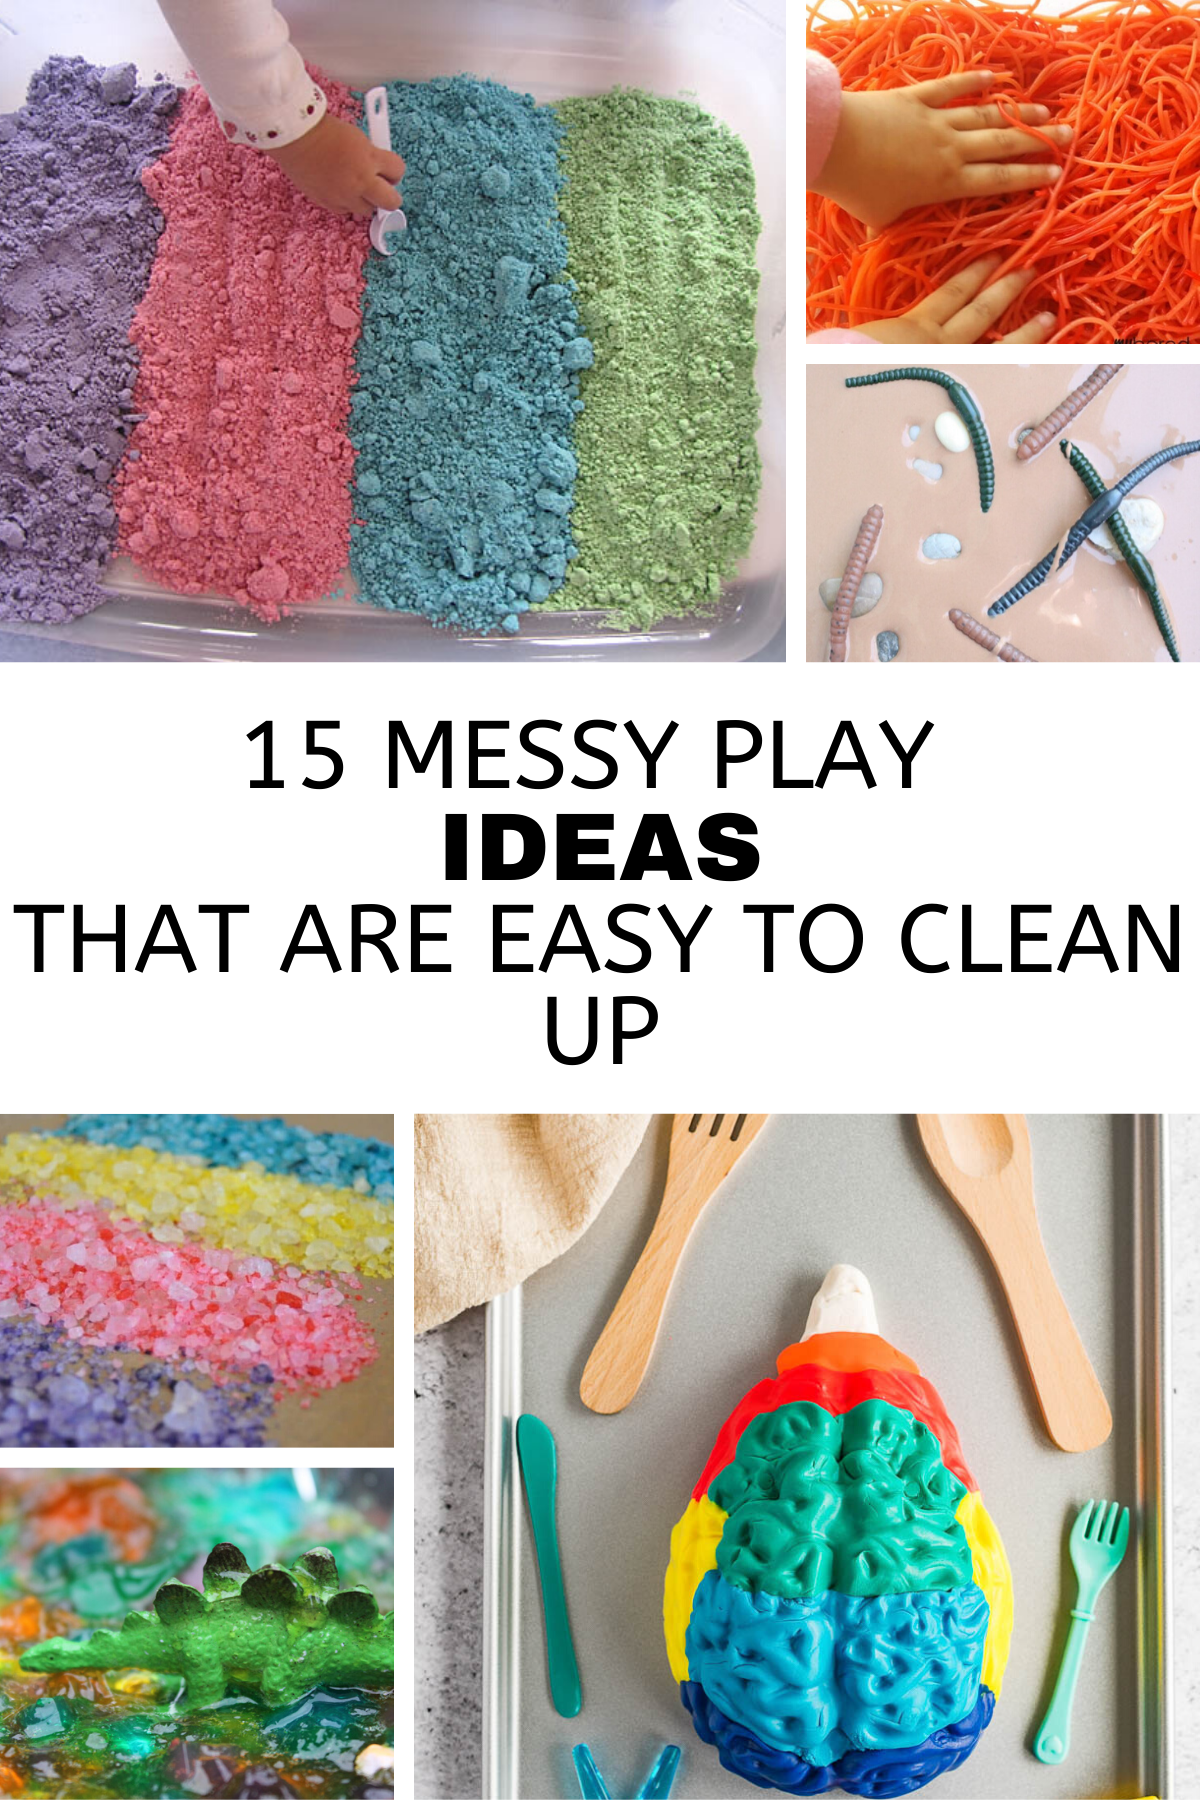 Collage images showing 6 different messy play activities